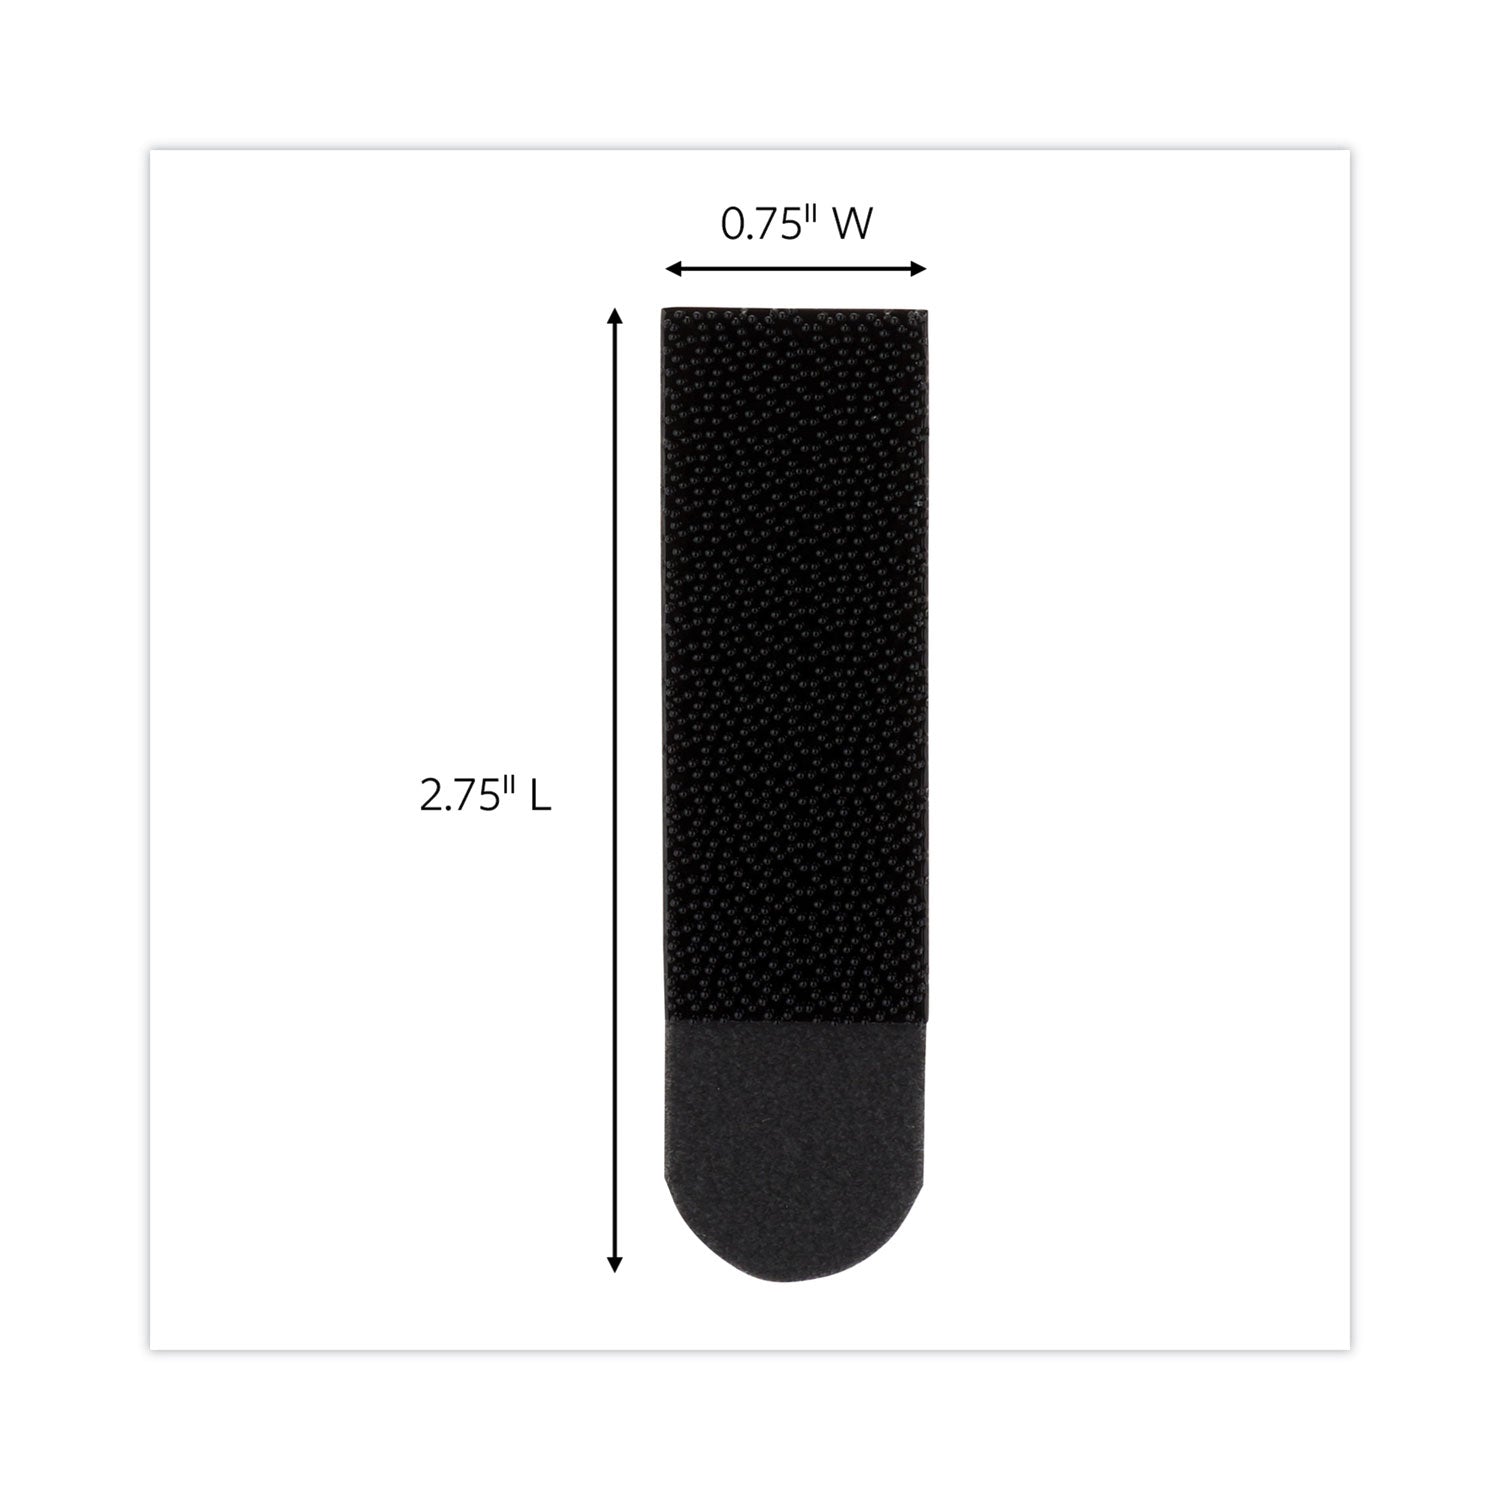 picture-hanging-strips-value-pack-medium-removable-holds-up-to-12-lbs-075-x-275-black-12-pairs-pack_mmm17204blk12es - 4